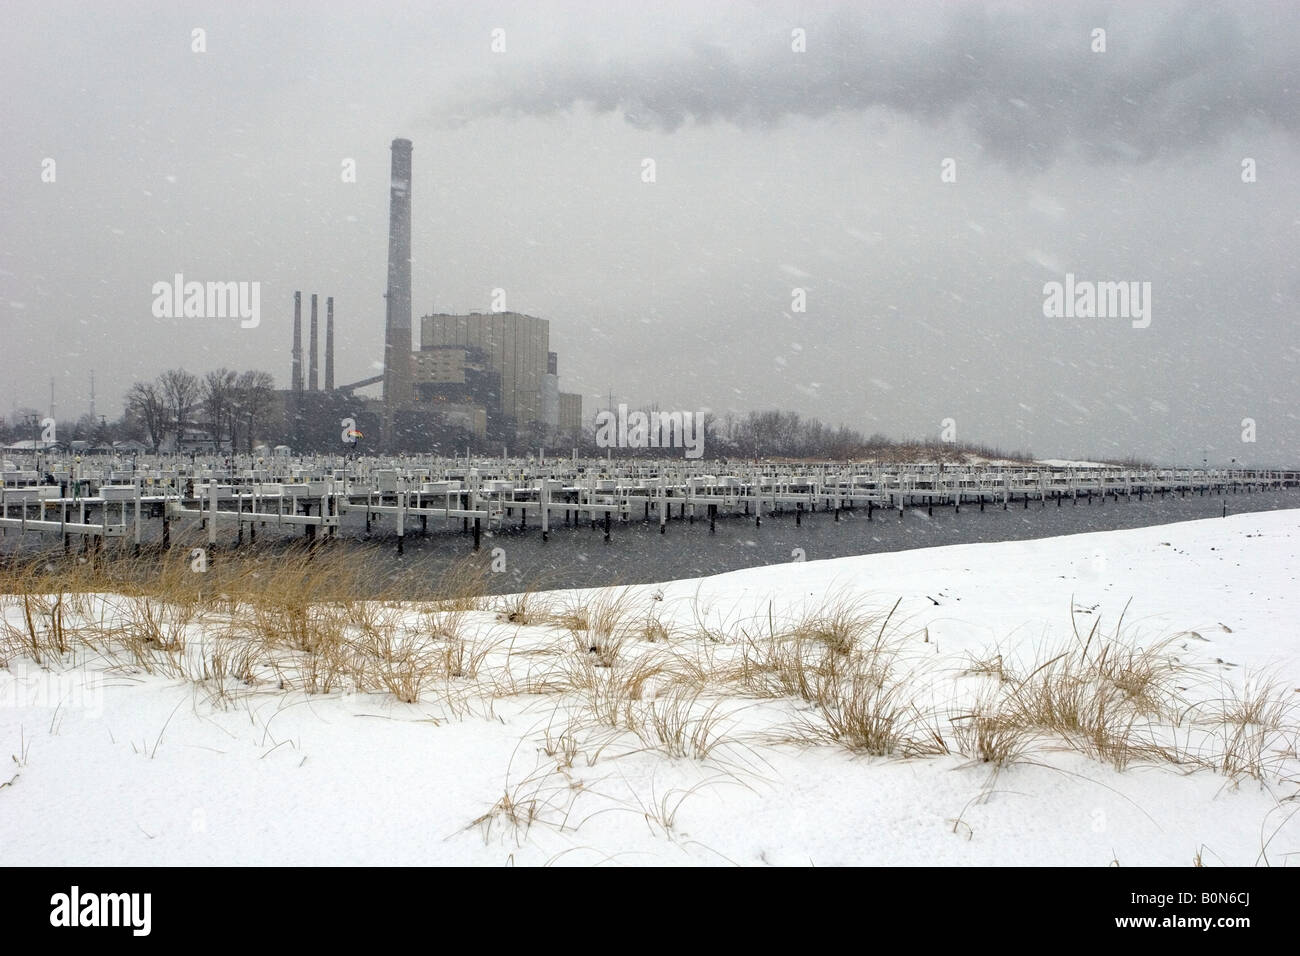 North Indiana Public Service Company (NIPSCO) electrical plant during snowfall. Stock Photo